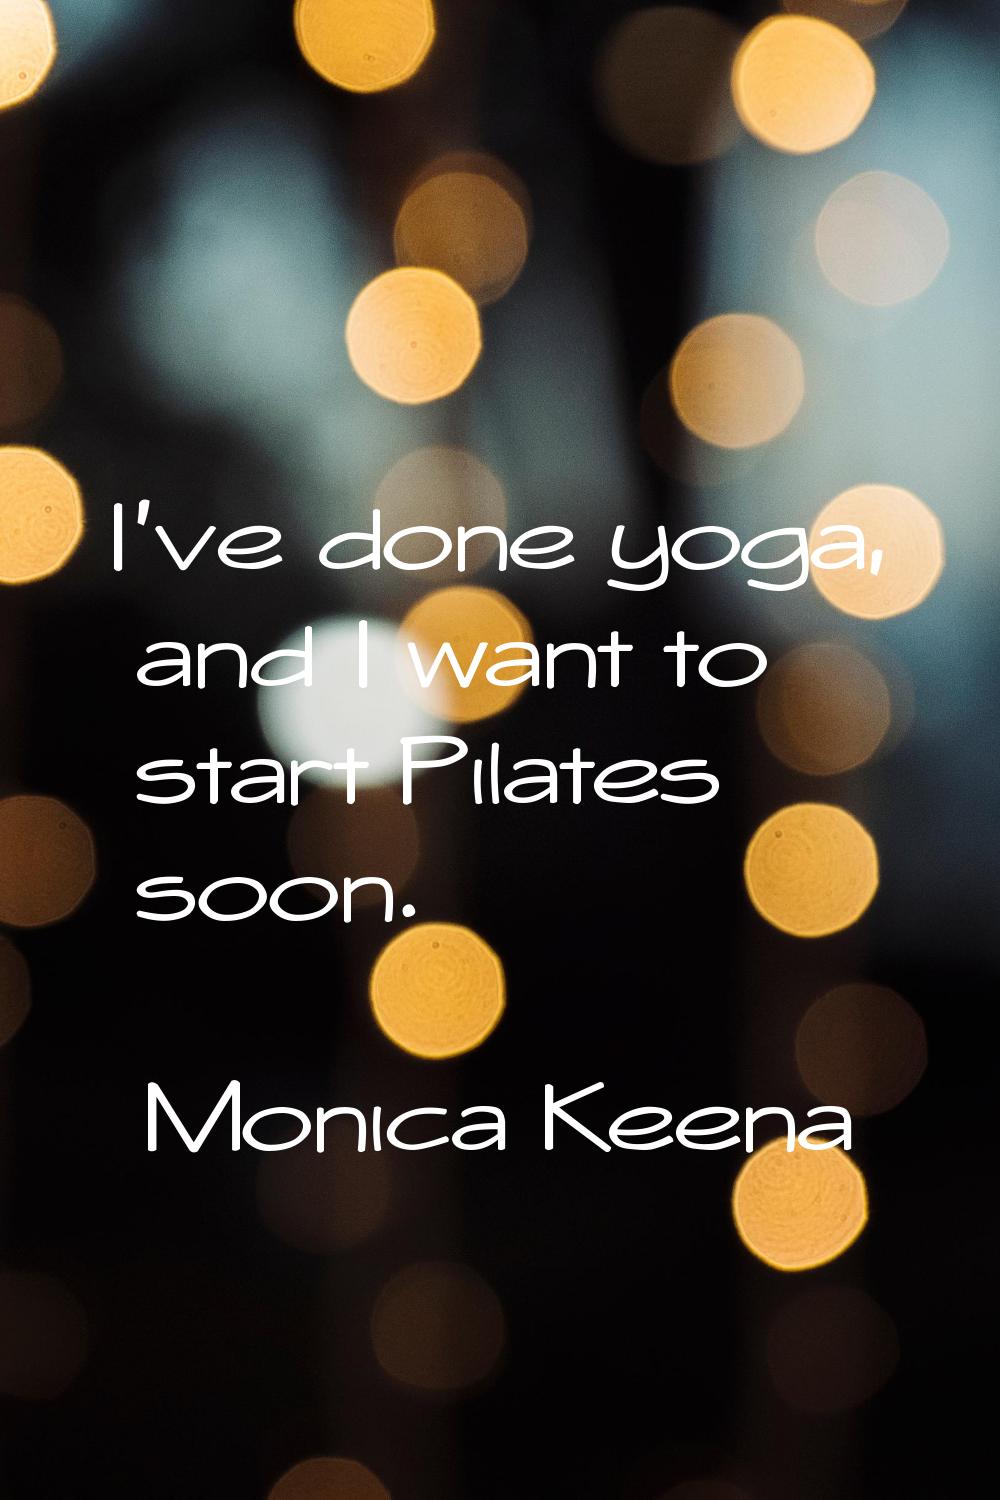 I've done yoga, and I want to start Pilates soon.